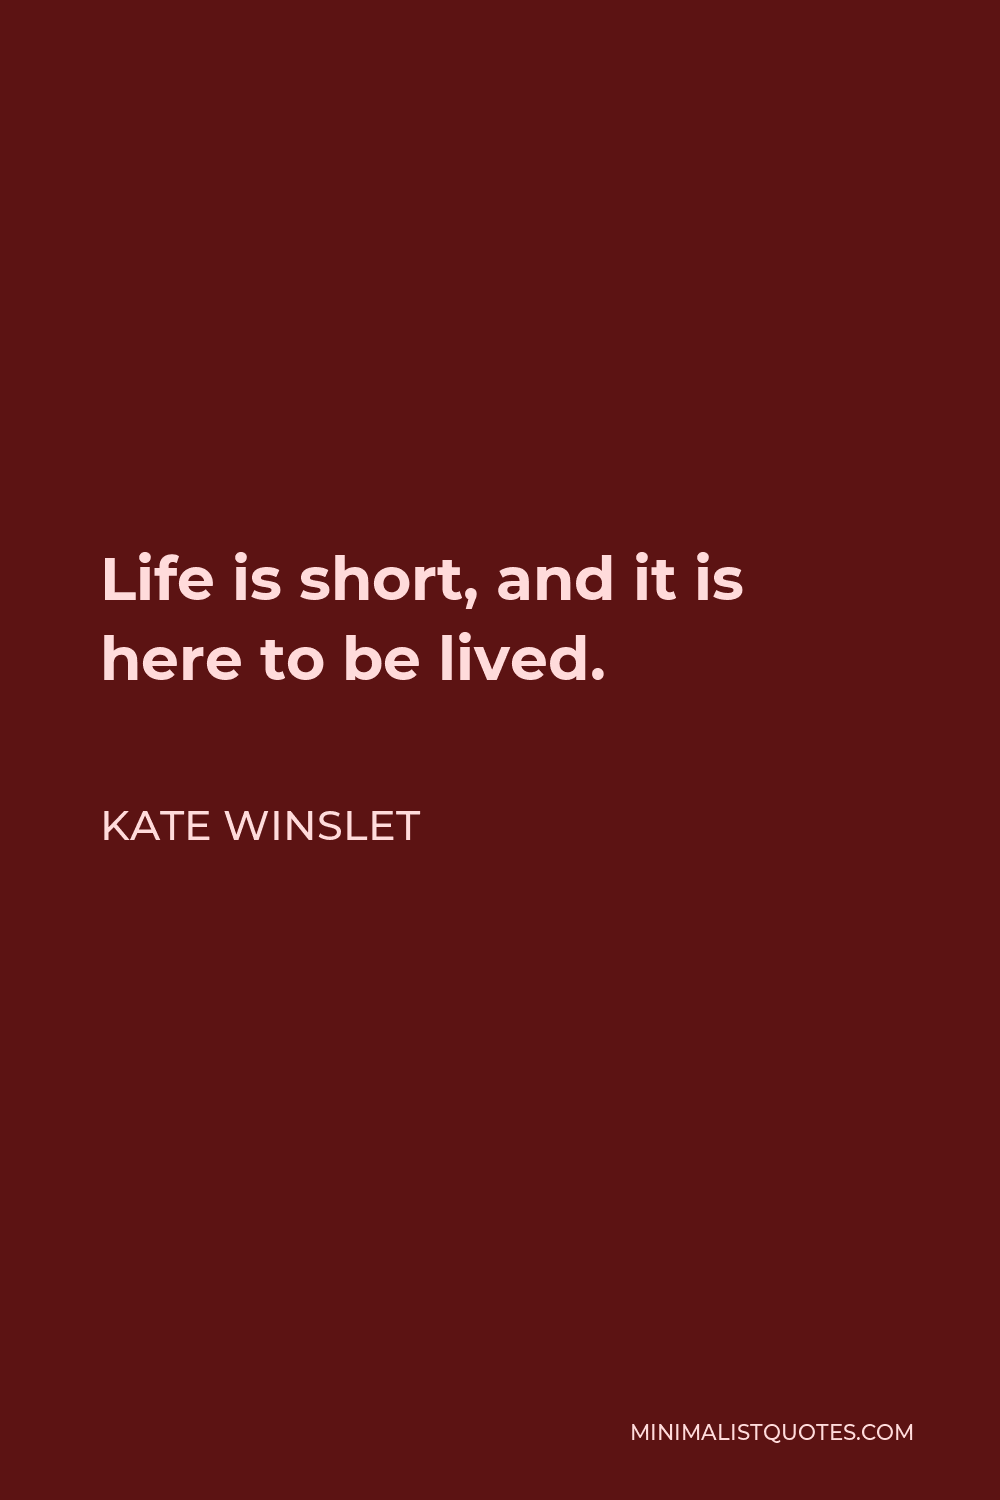 Kate Winslet Quote - Life is short, and it is here to be lived.